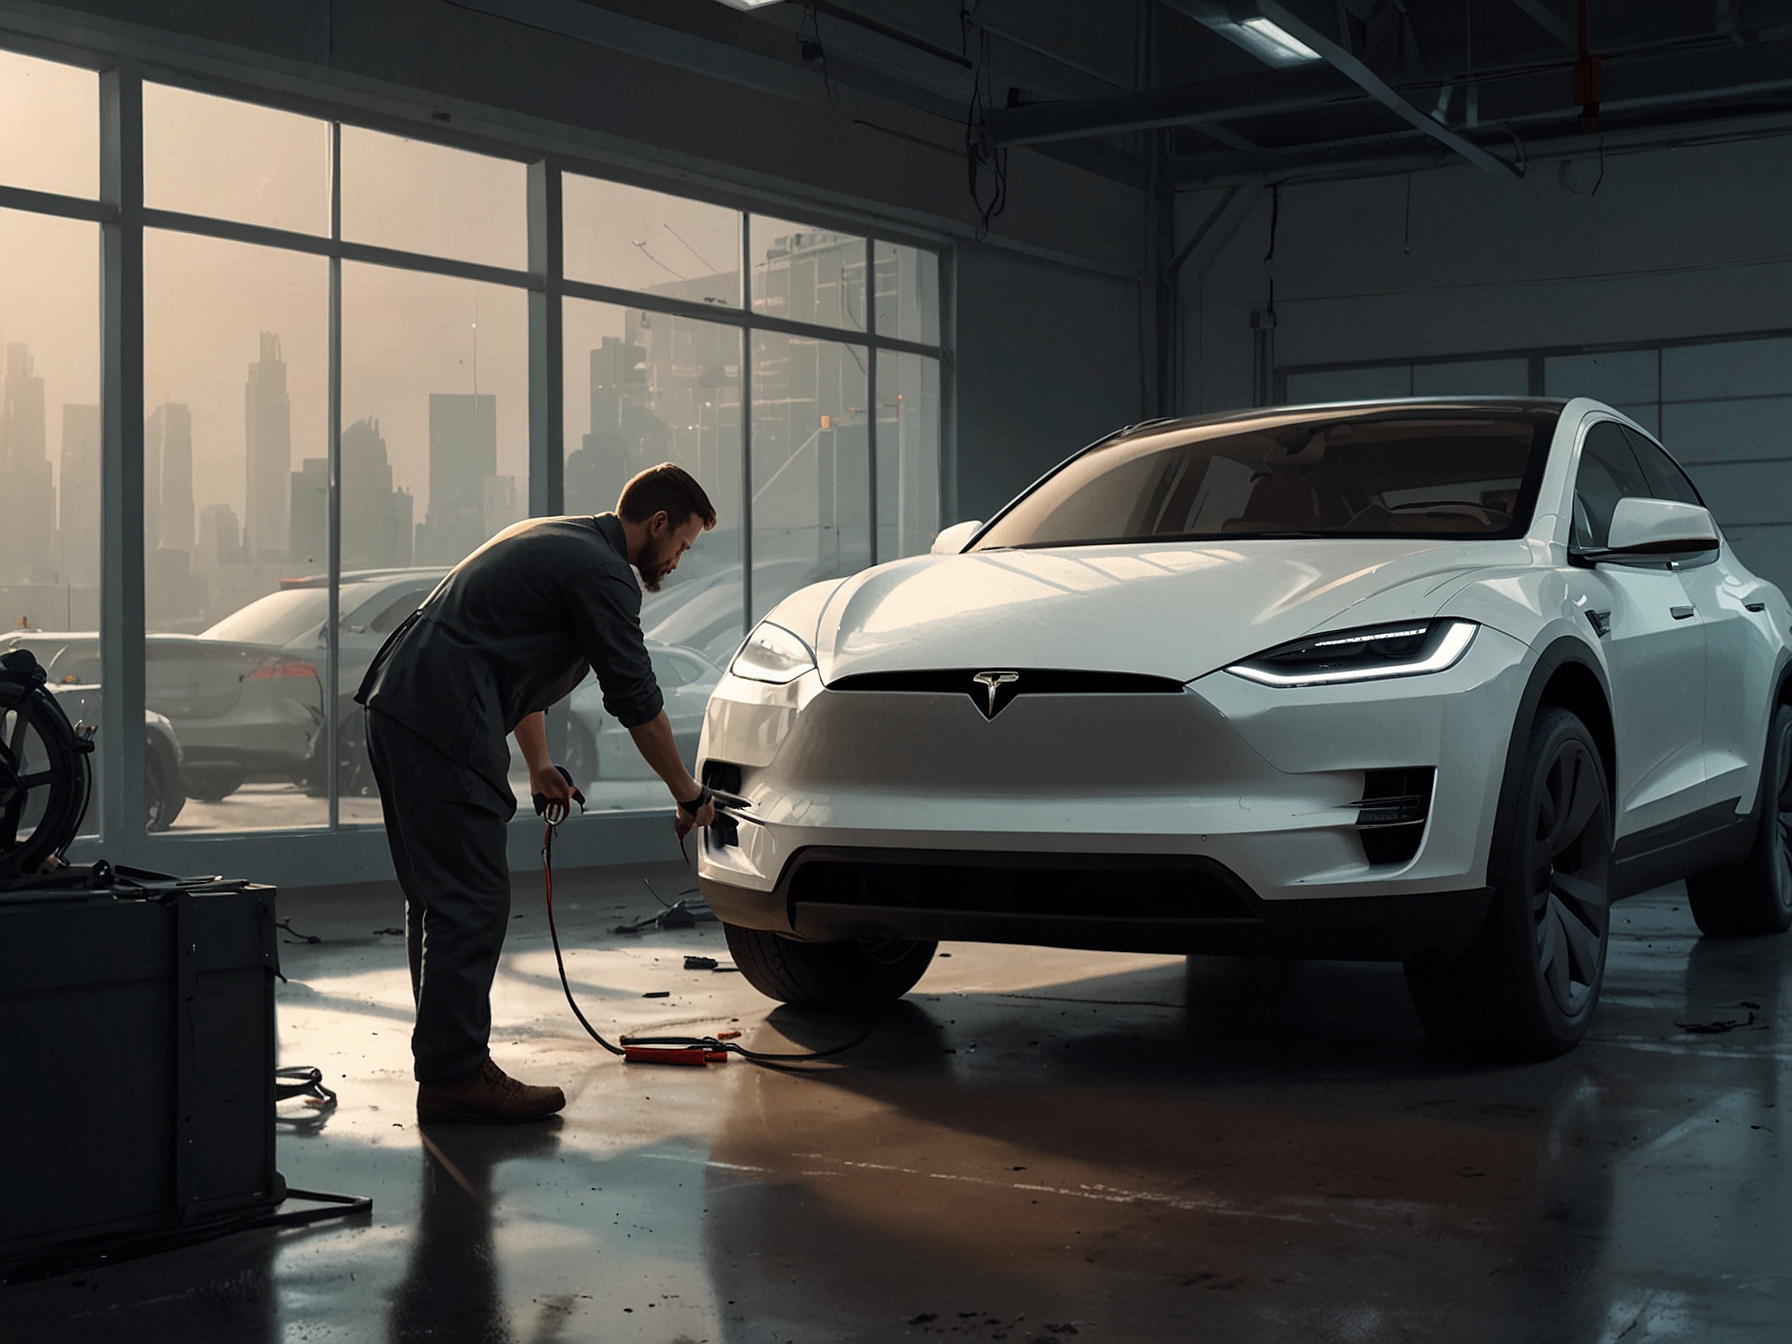 A technician inspecting a Tesla Cybertruck's windshield wipers in a service center, highlighting the proactive measures taken by Tesla to address and fix the faulty components.